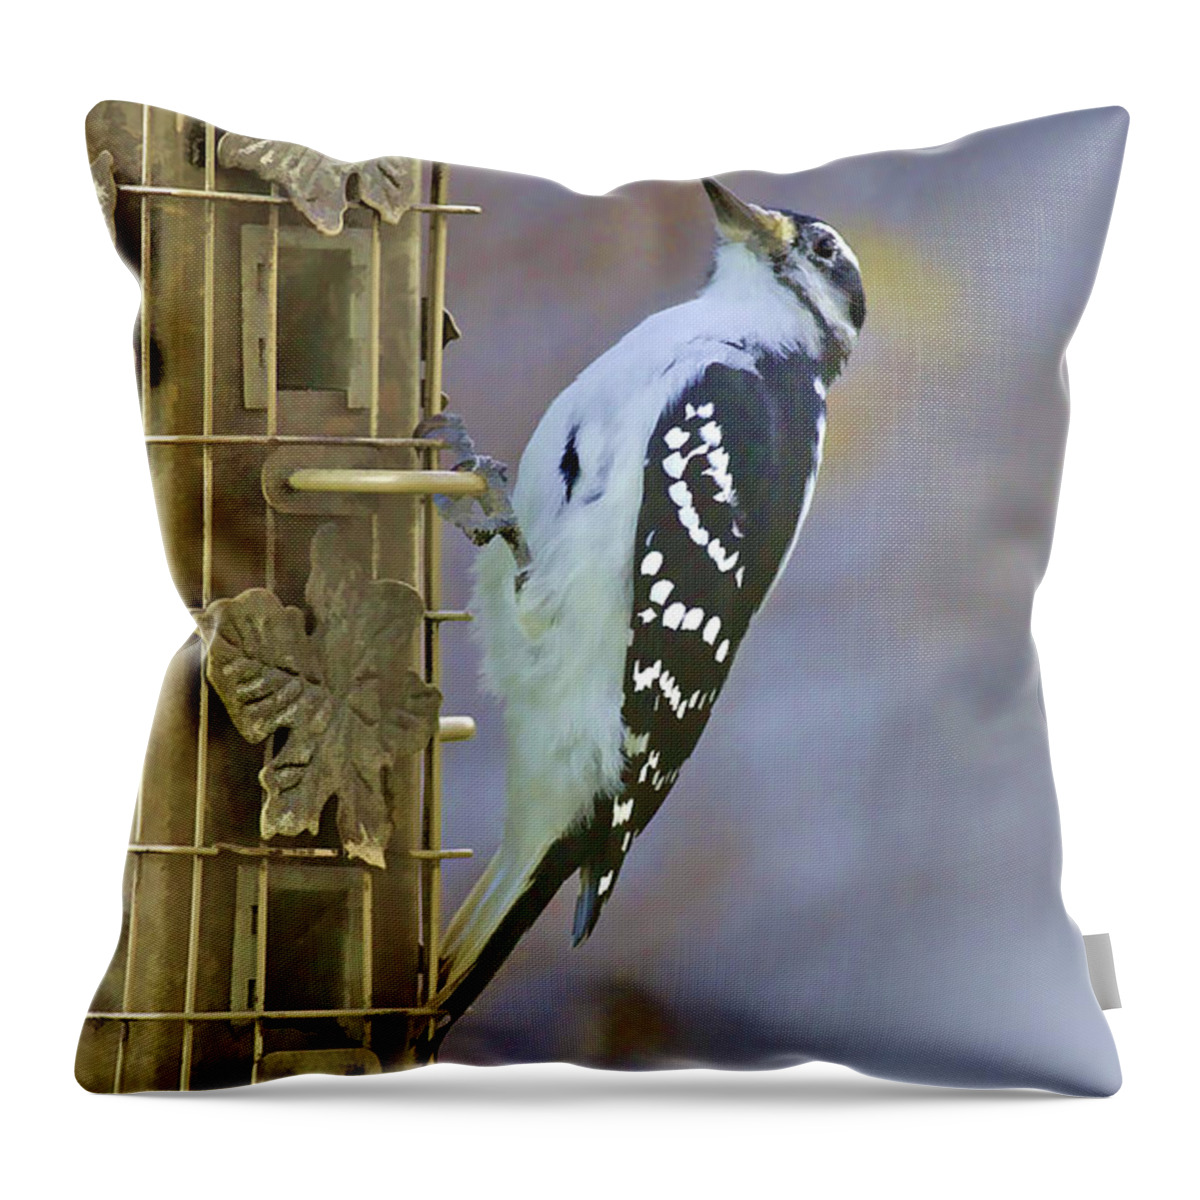 Wildlife Throw Pillow featuring the photograph Let Me Pose For You by Deborah Benoit